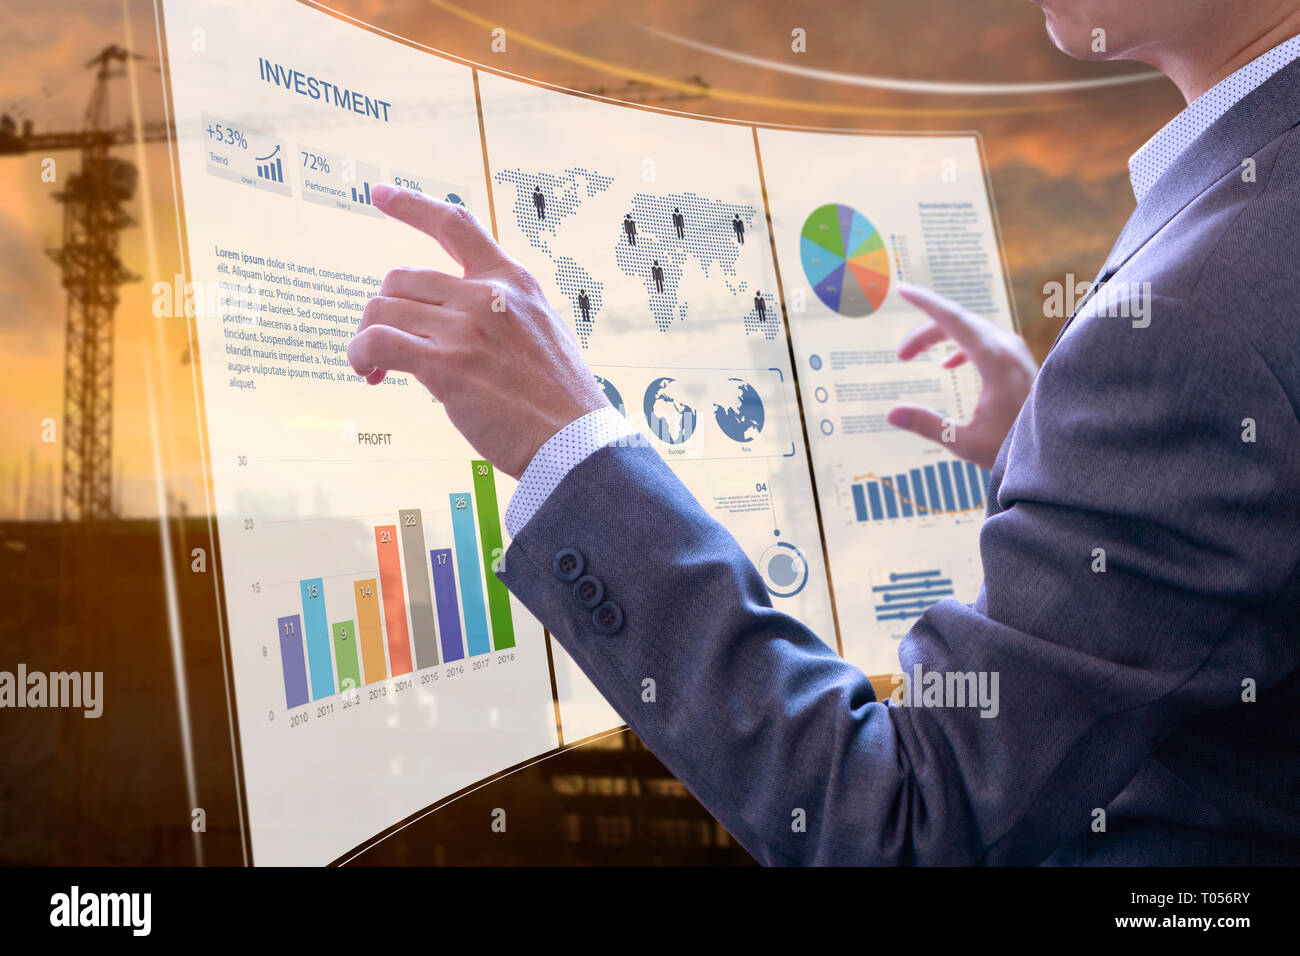 Businessman in front of modern virtual touch screen analysing on investment risk management and return on investment analysis on real estate building  Stock Photo